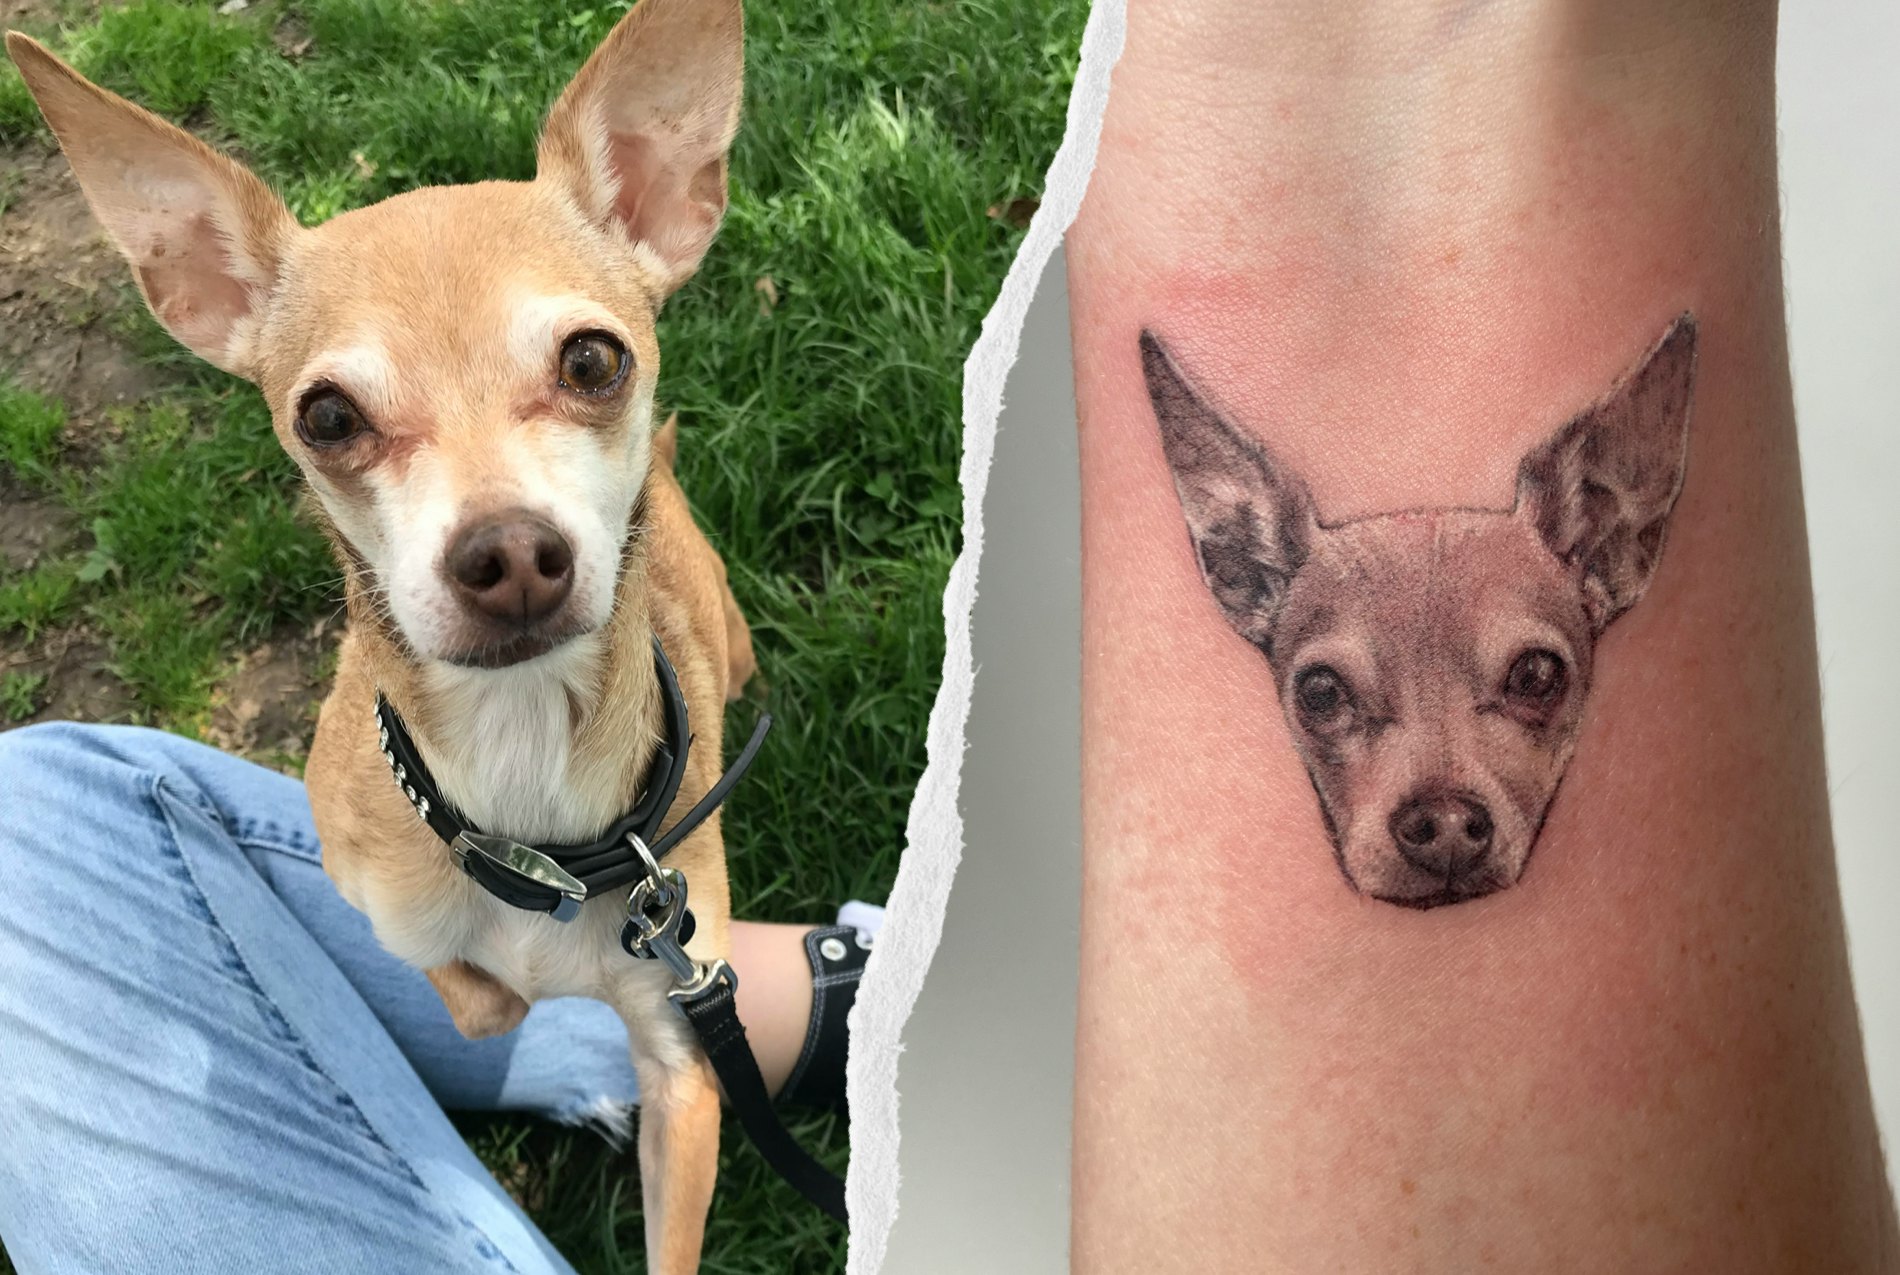 11 sweet and classy dog tattoos to show your pup your undying love